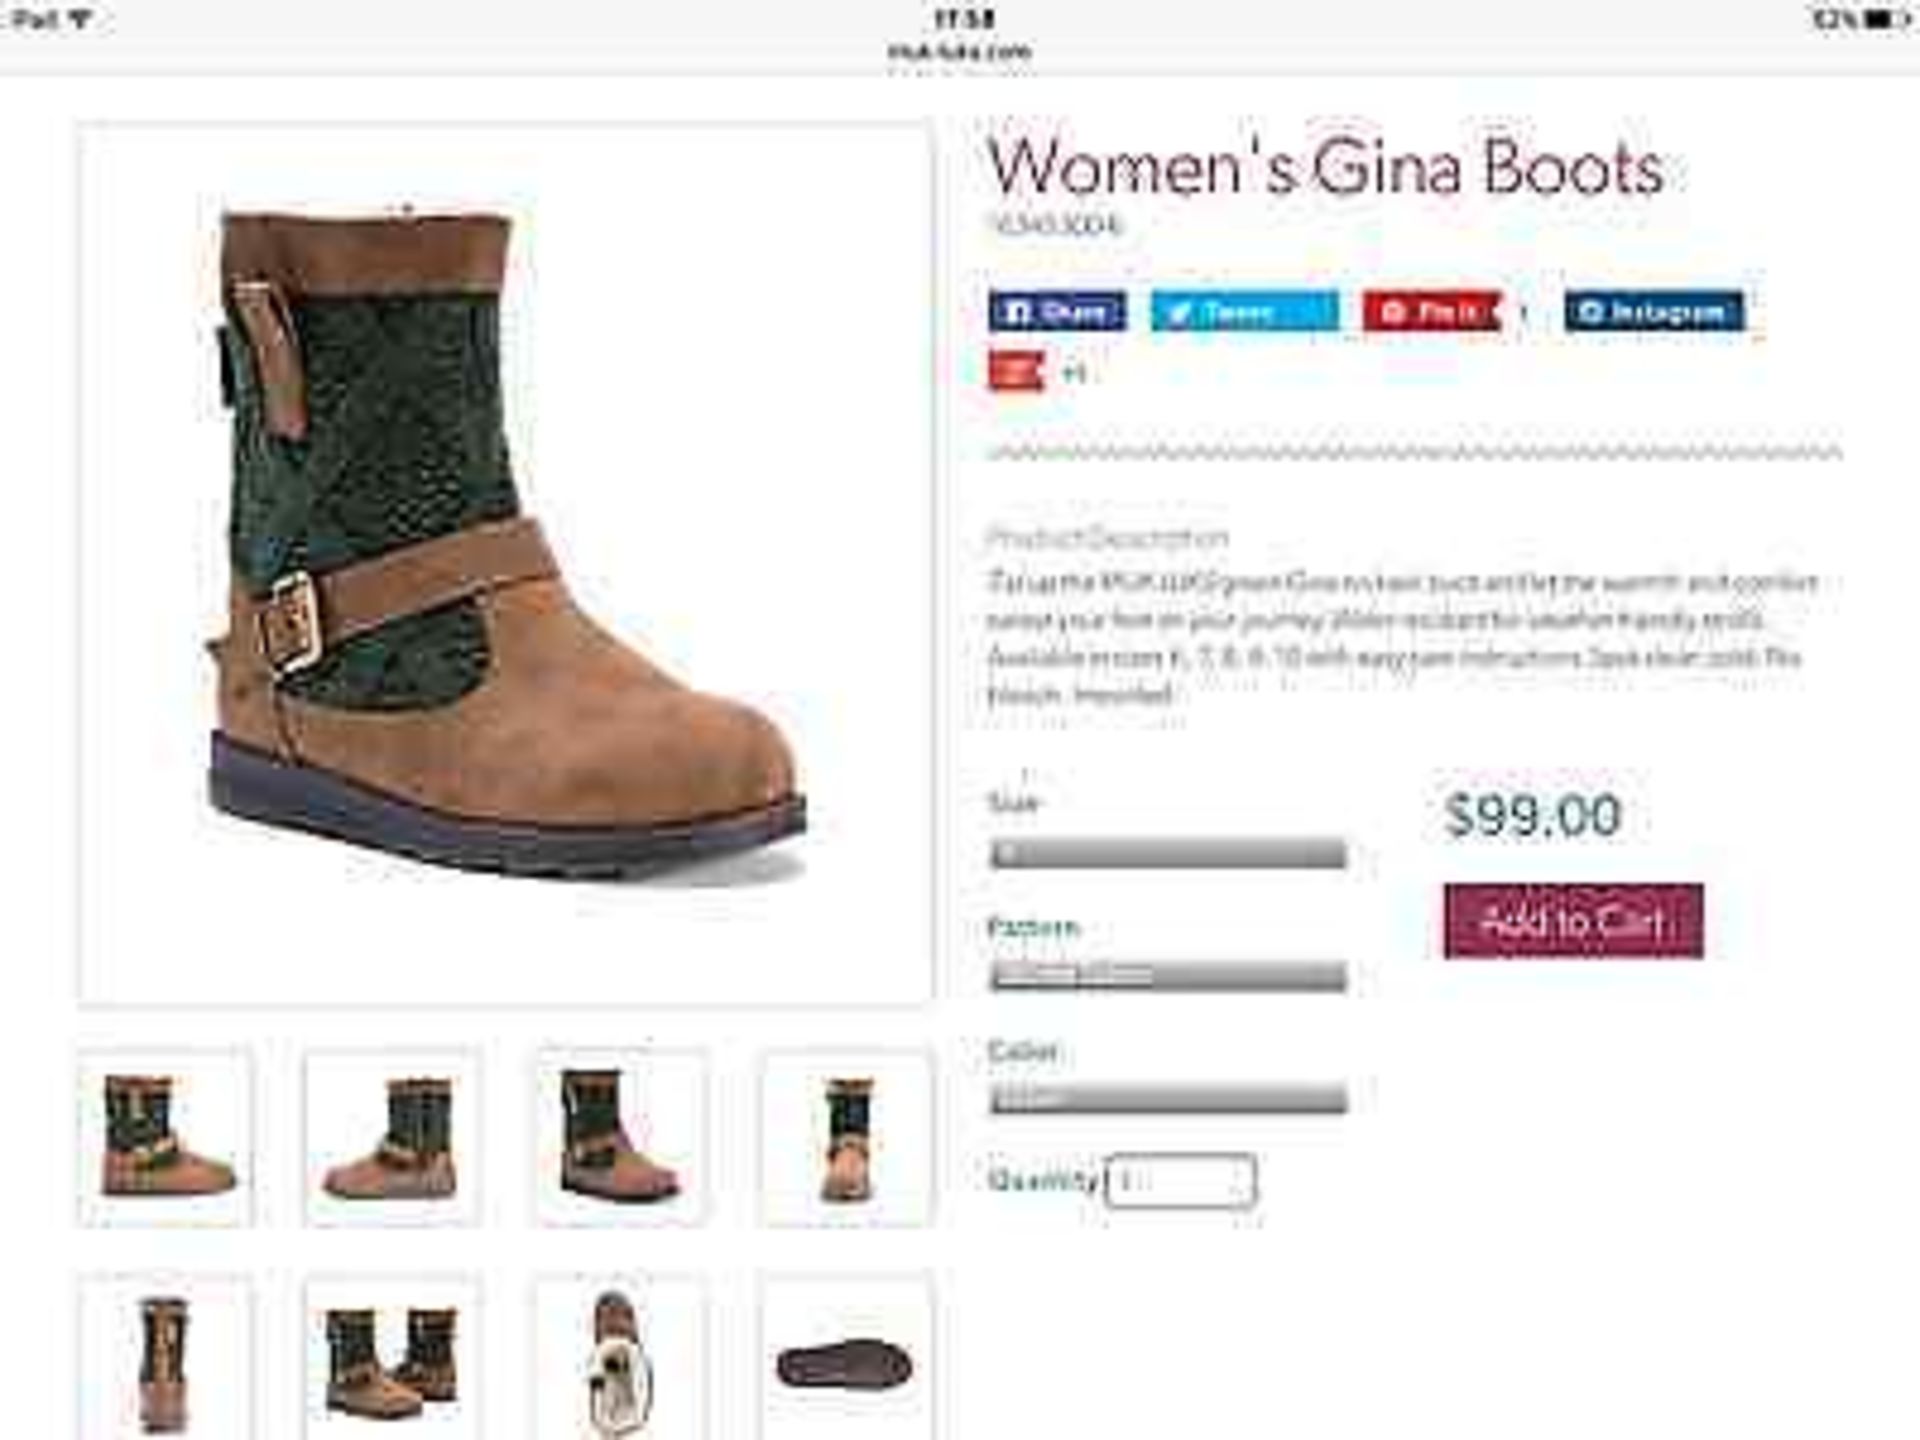 The Original Muk Luks Gina Boot, Size 5, RRP $99 (New without box) - Image 3 of 8